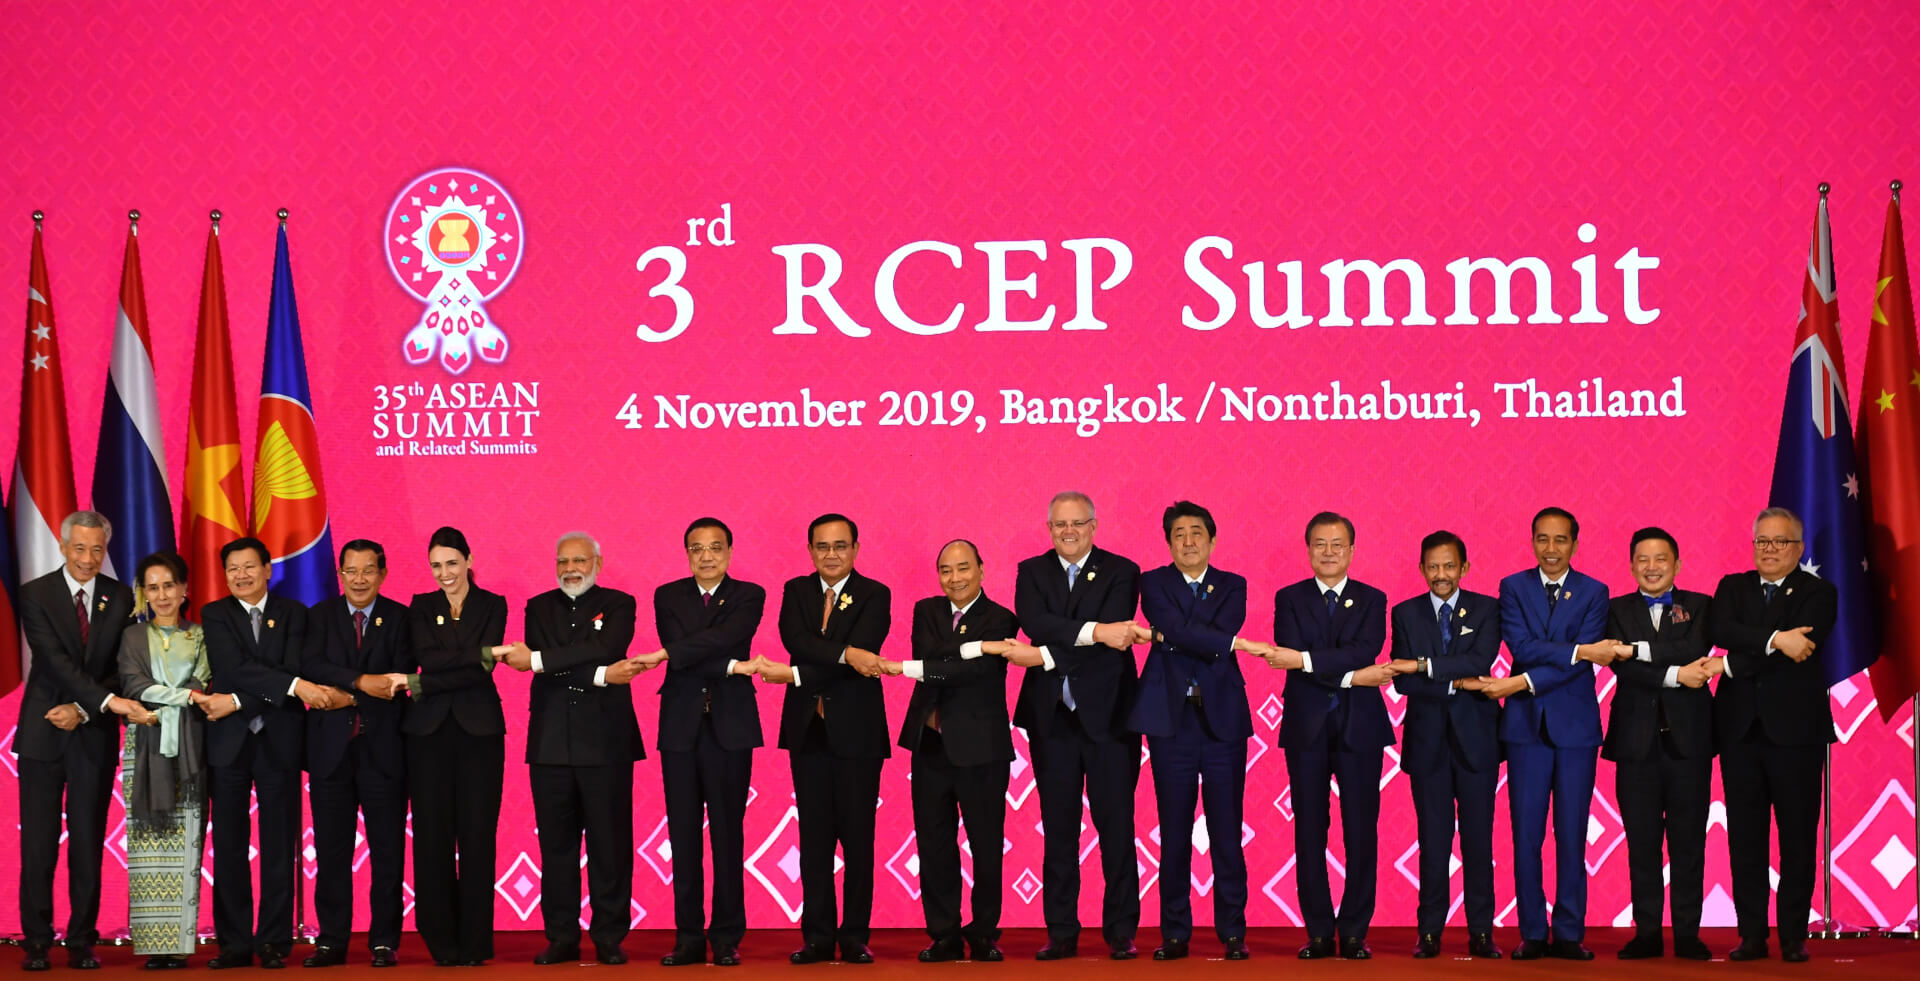 15 Asia-Pacific Countries Sign RCEP Deal to Form World's Largest Trading Bloc